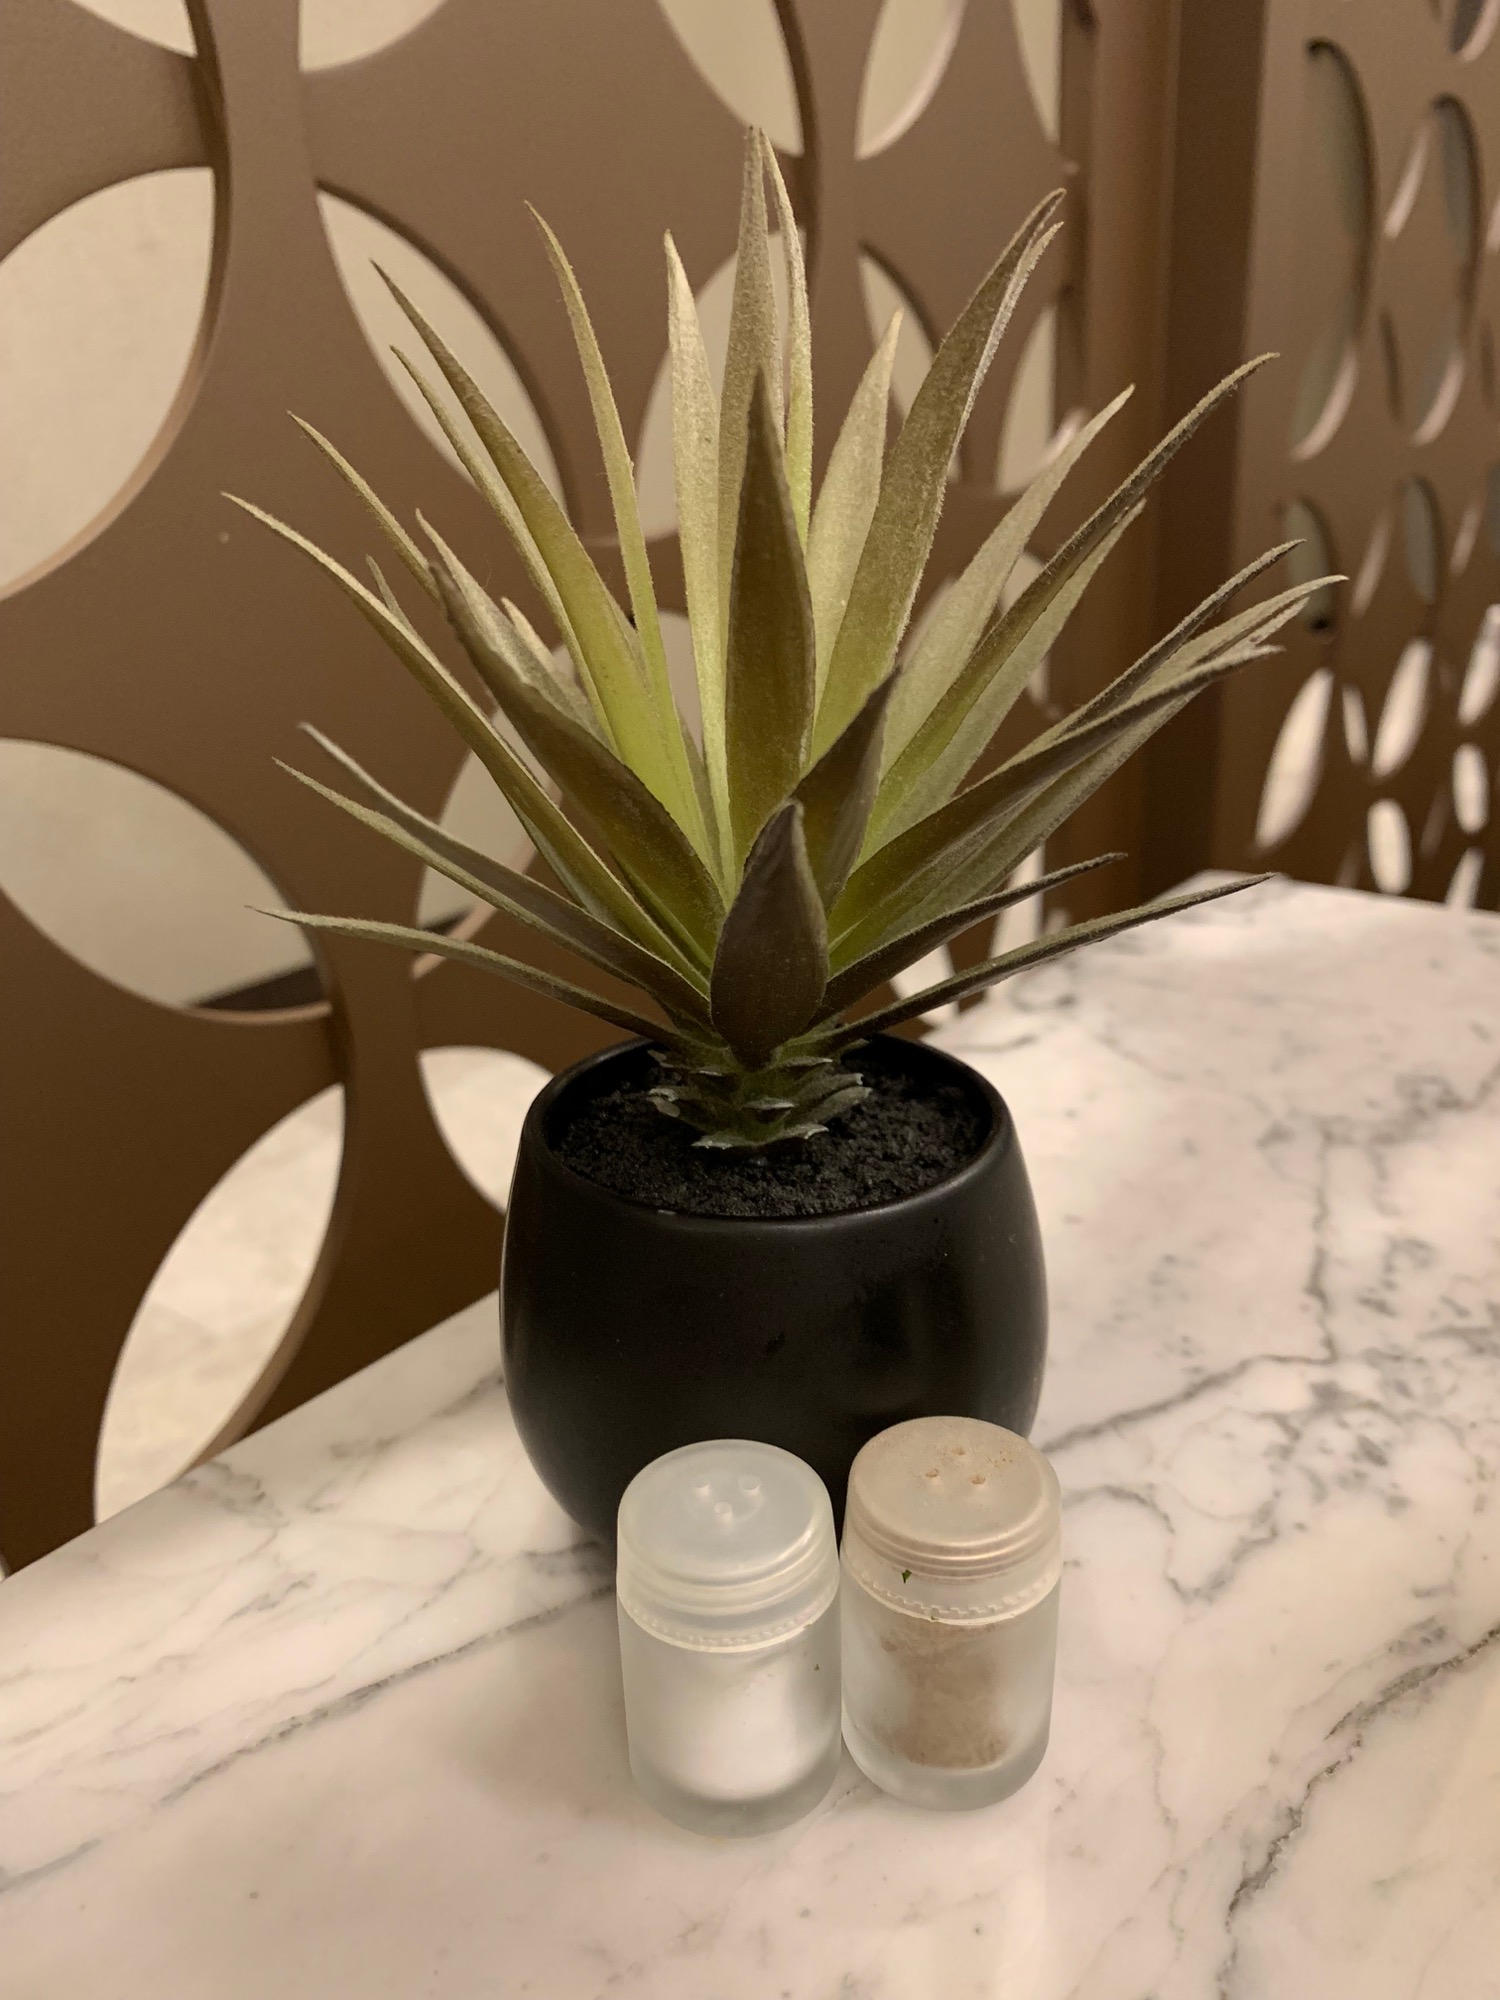 a plant in a pot next to salt and pepper shakers